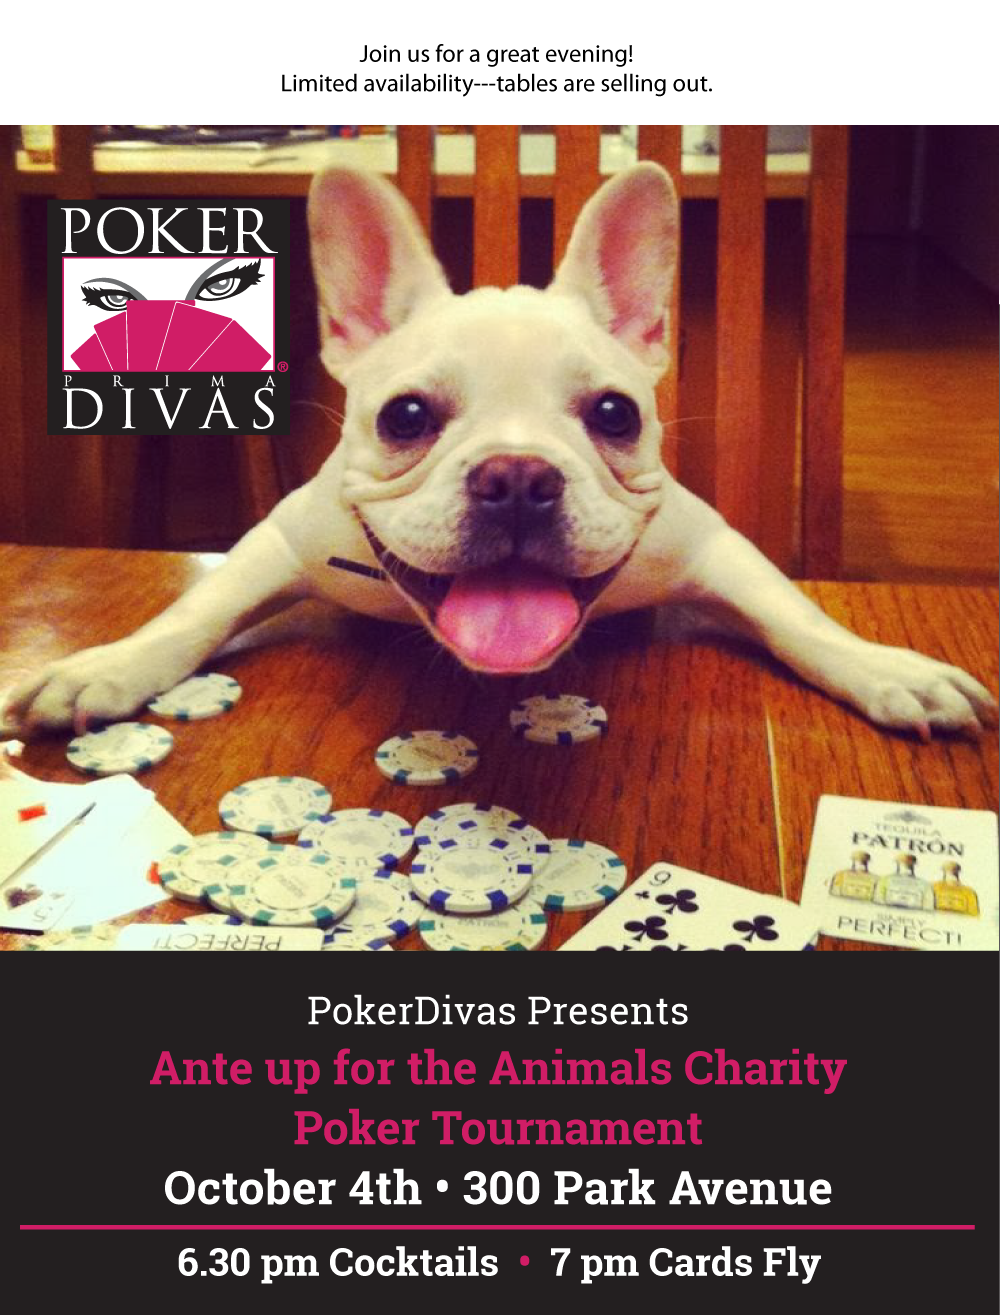 Ante up for the Animals Charity Poker Tournament